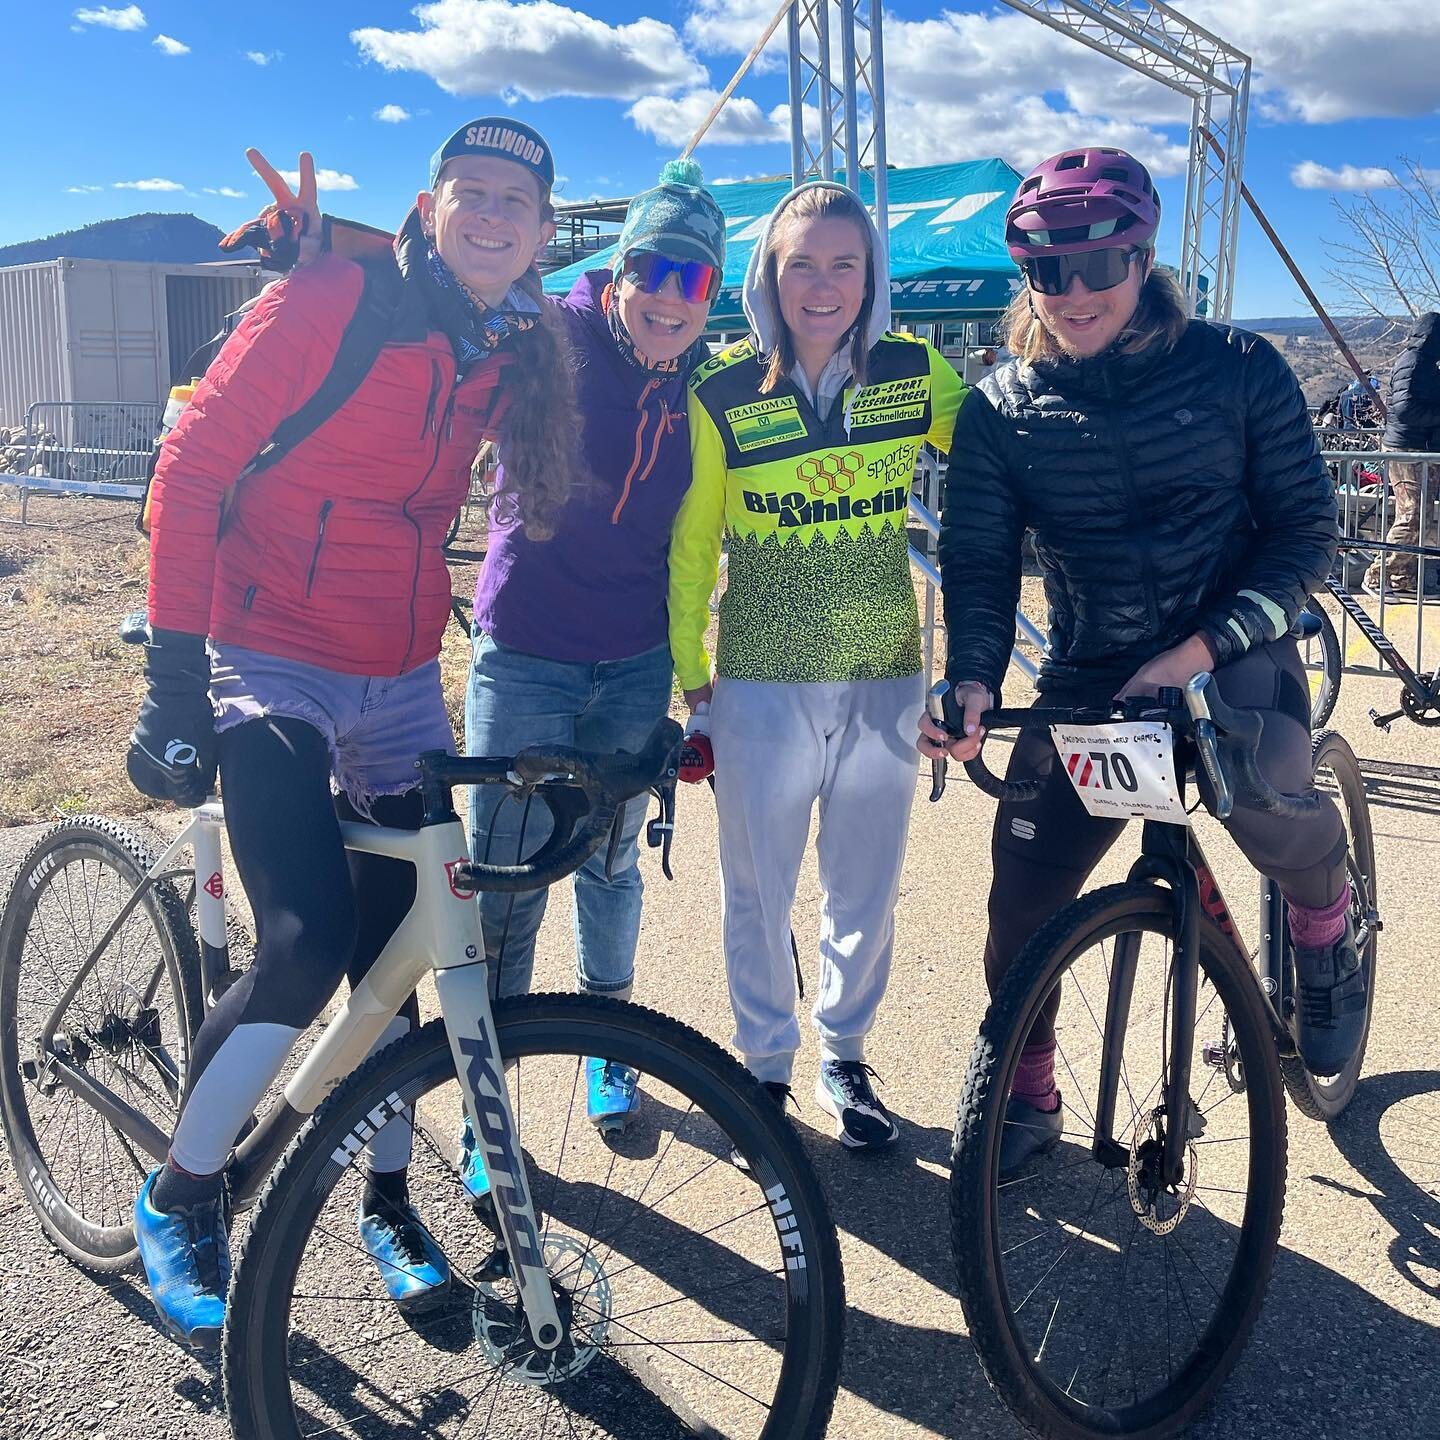 Last weekend was an Officially Unofficial S&amp;M Worldwide Race Weekend! A Global Takeover of the orange &amp; blue, you might say! While factions of the team raced at home in Portland, back east in Mass, and abroad in Belgium, this intrepid crew of